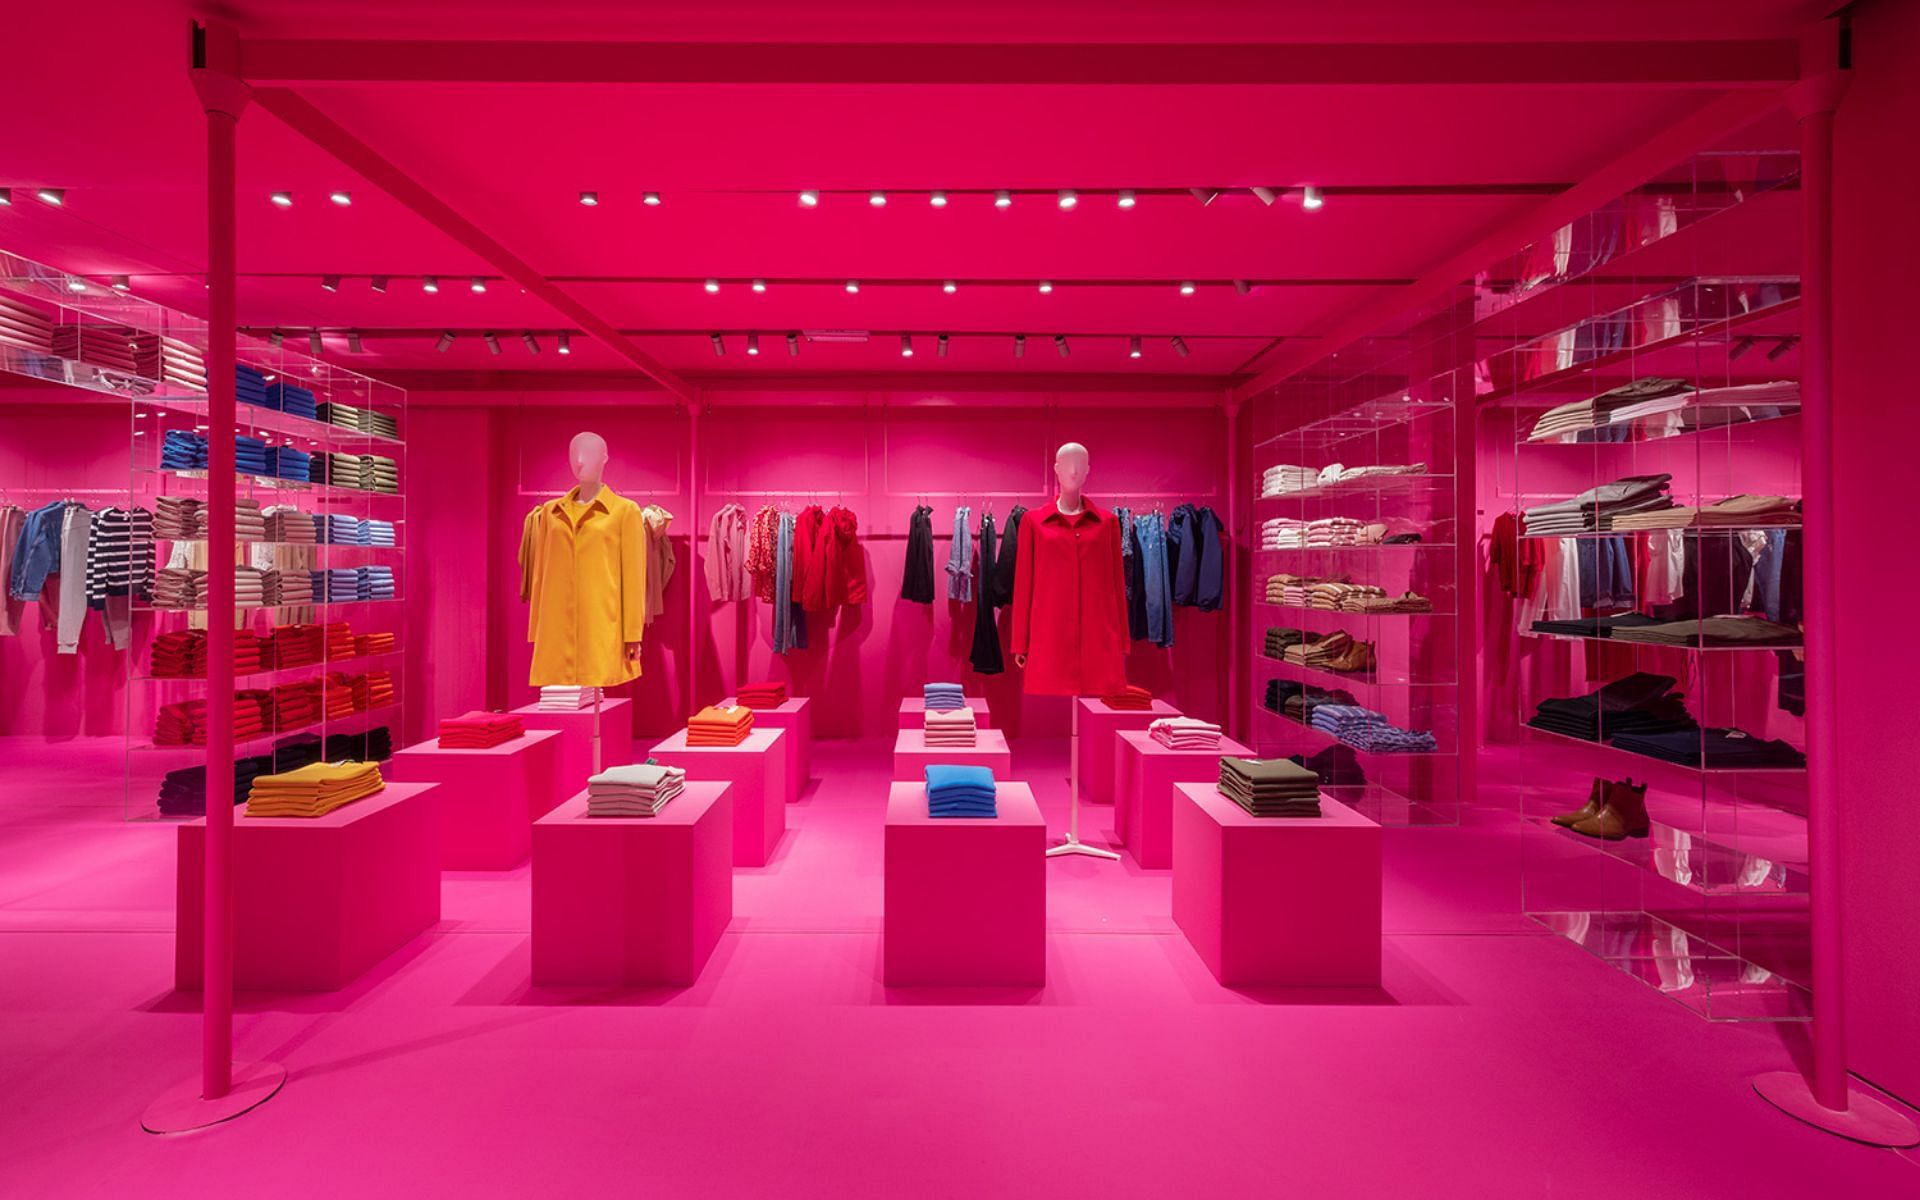 The pink setup for Benetton&#039;s new store (Image via Benetton group)